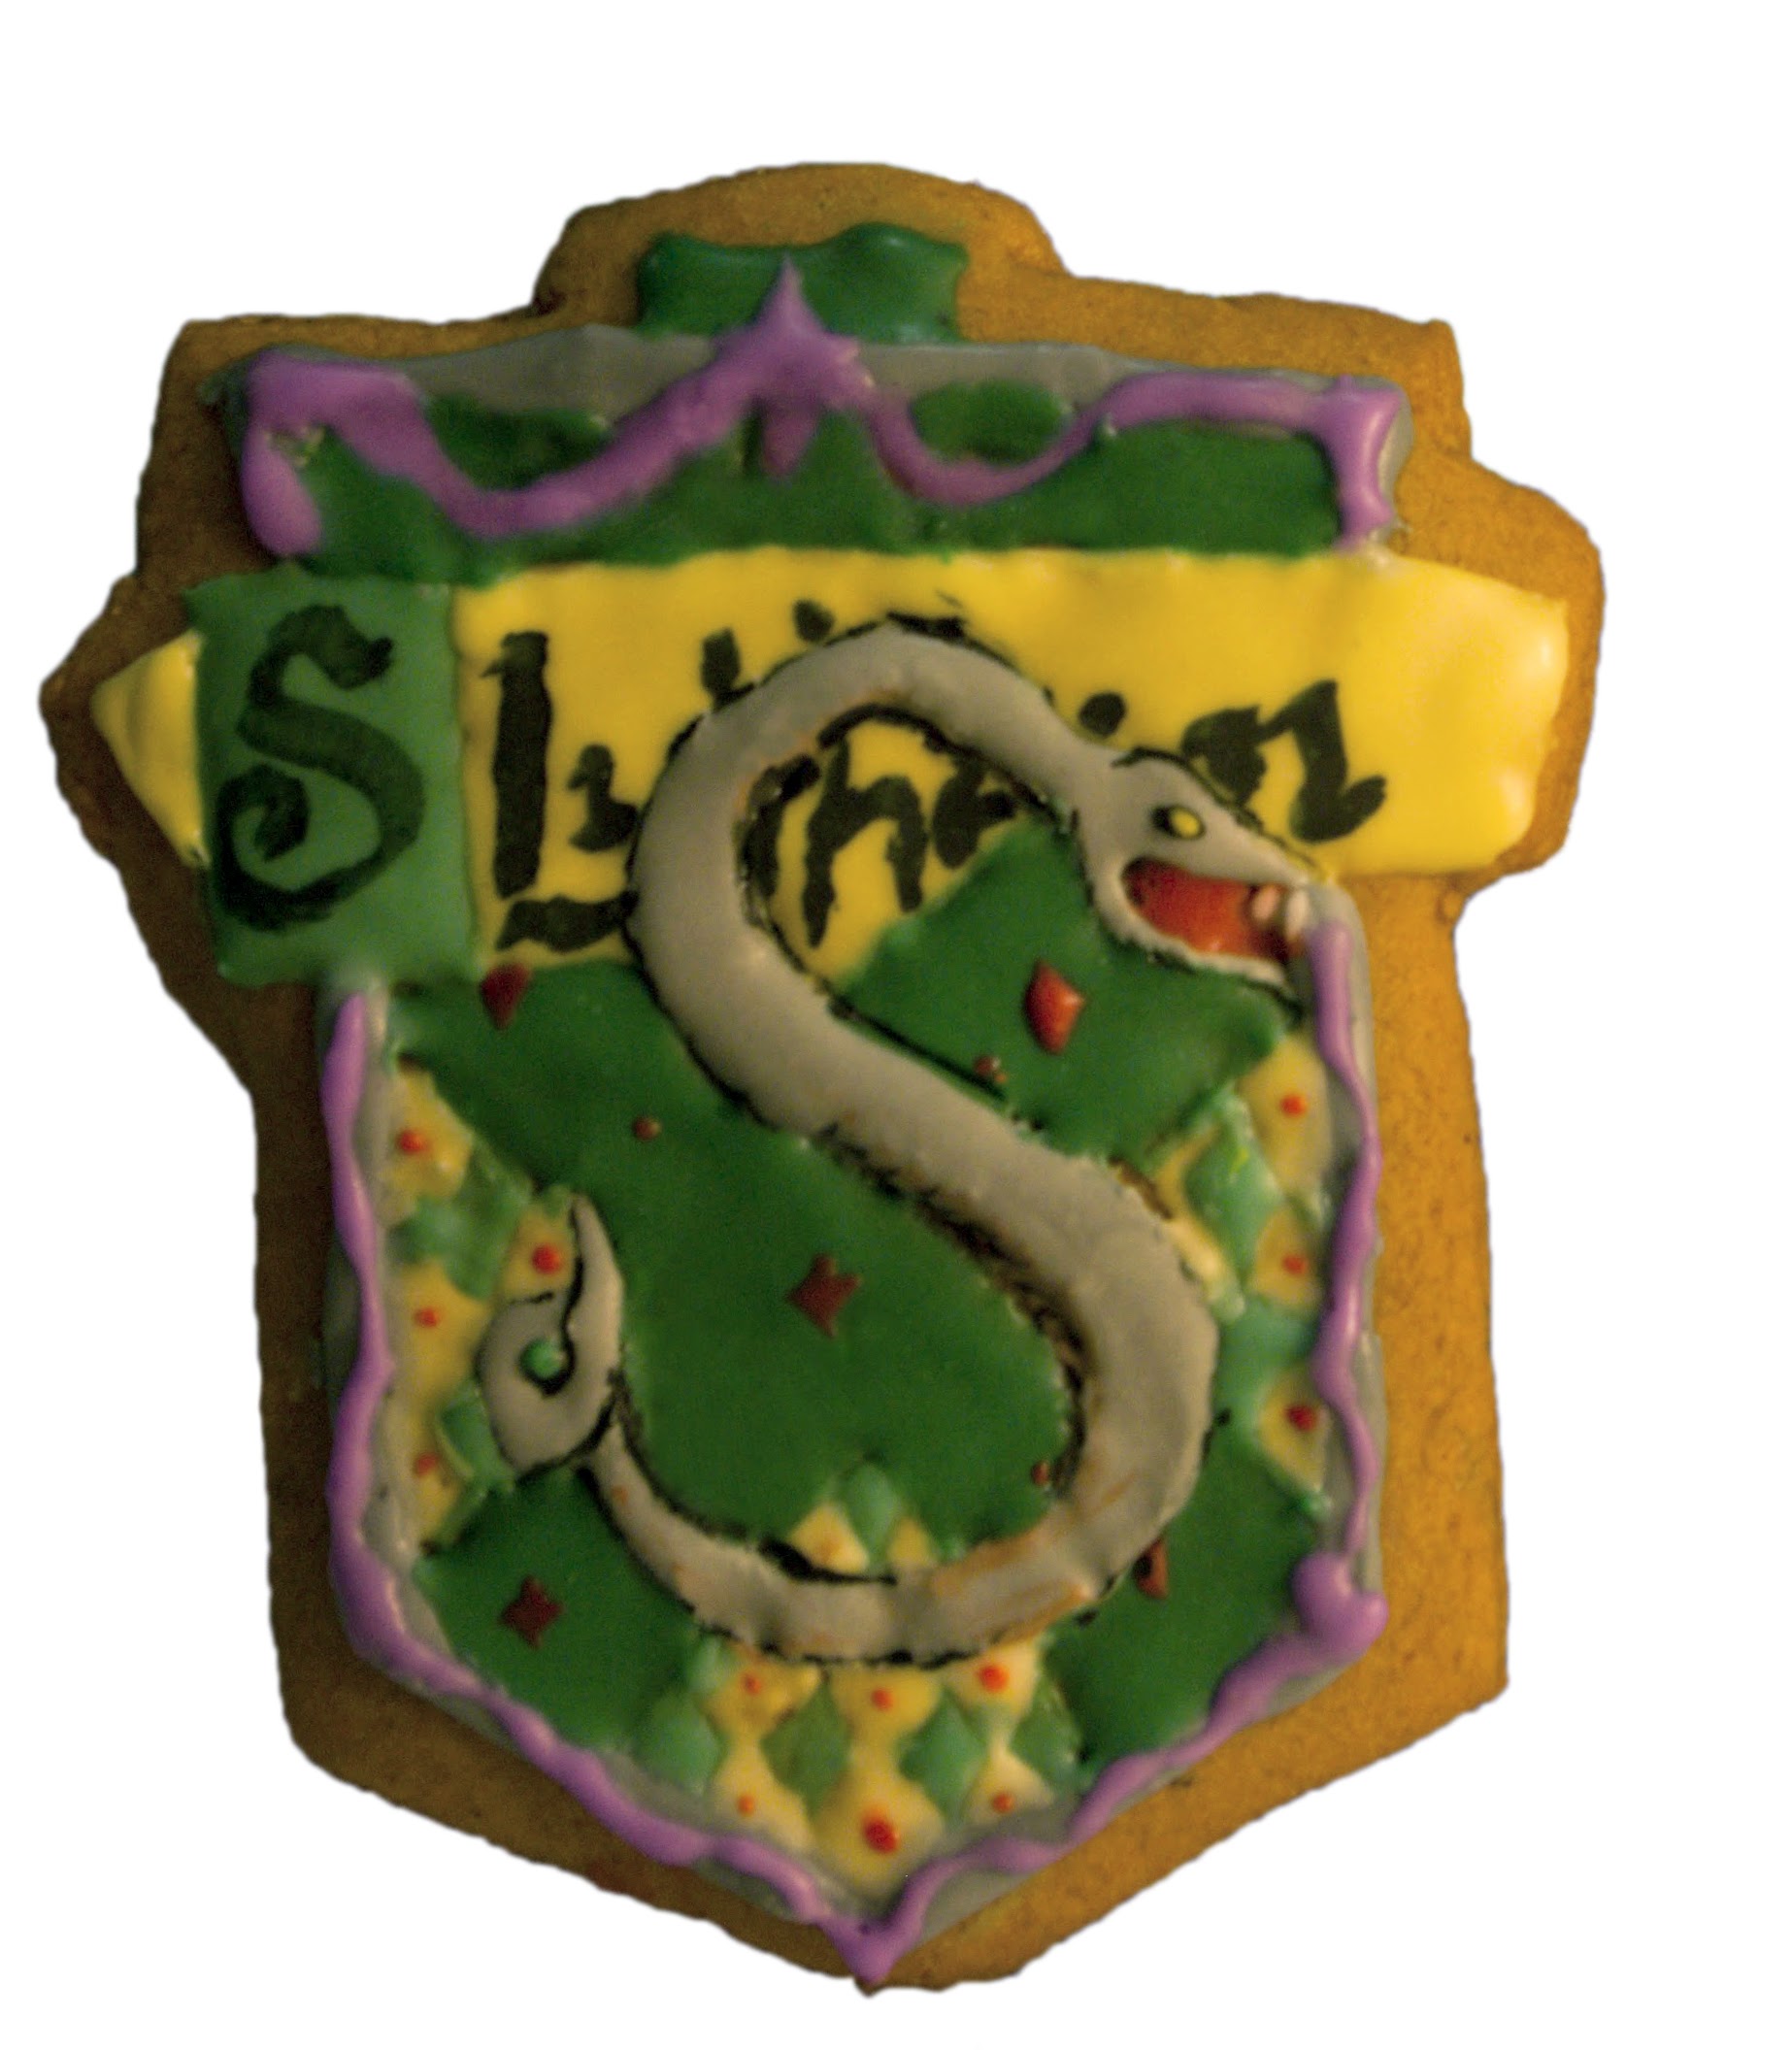 Slytherin house gingerbread cookie with hand-painted royal icing